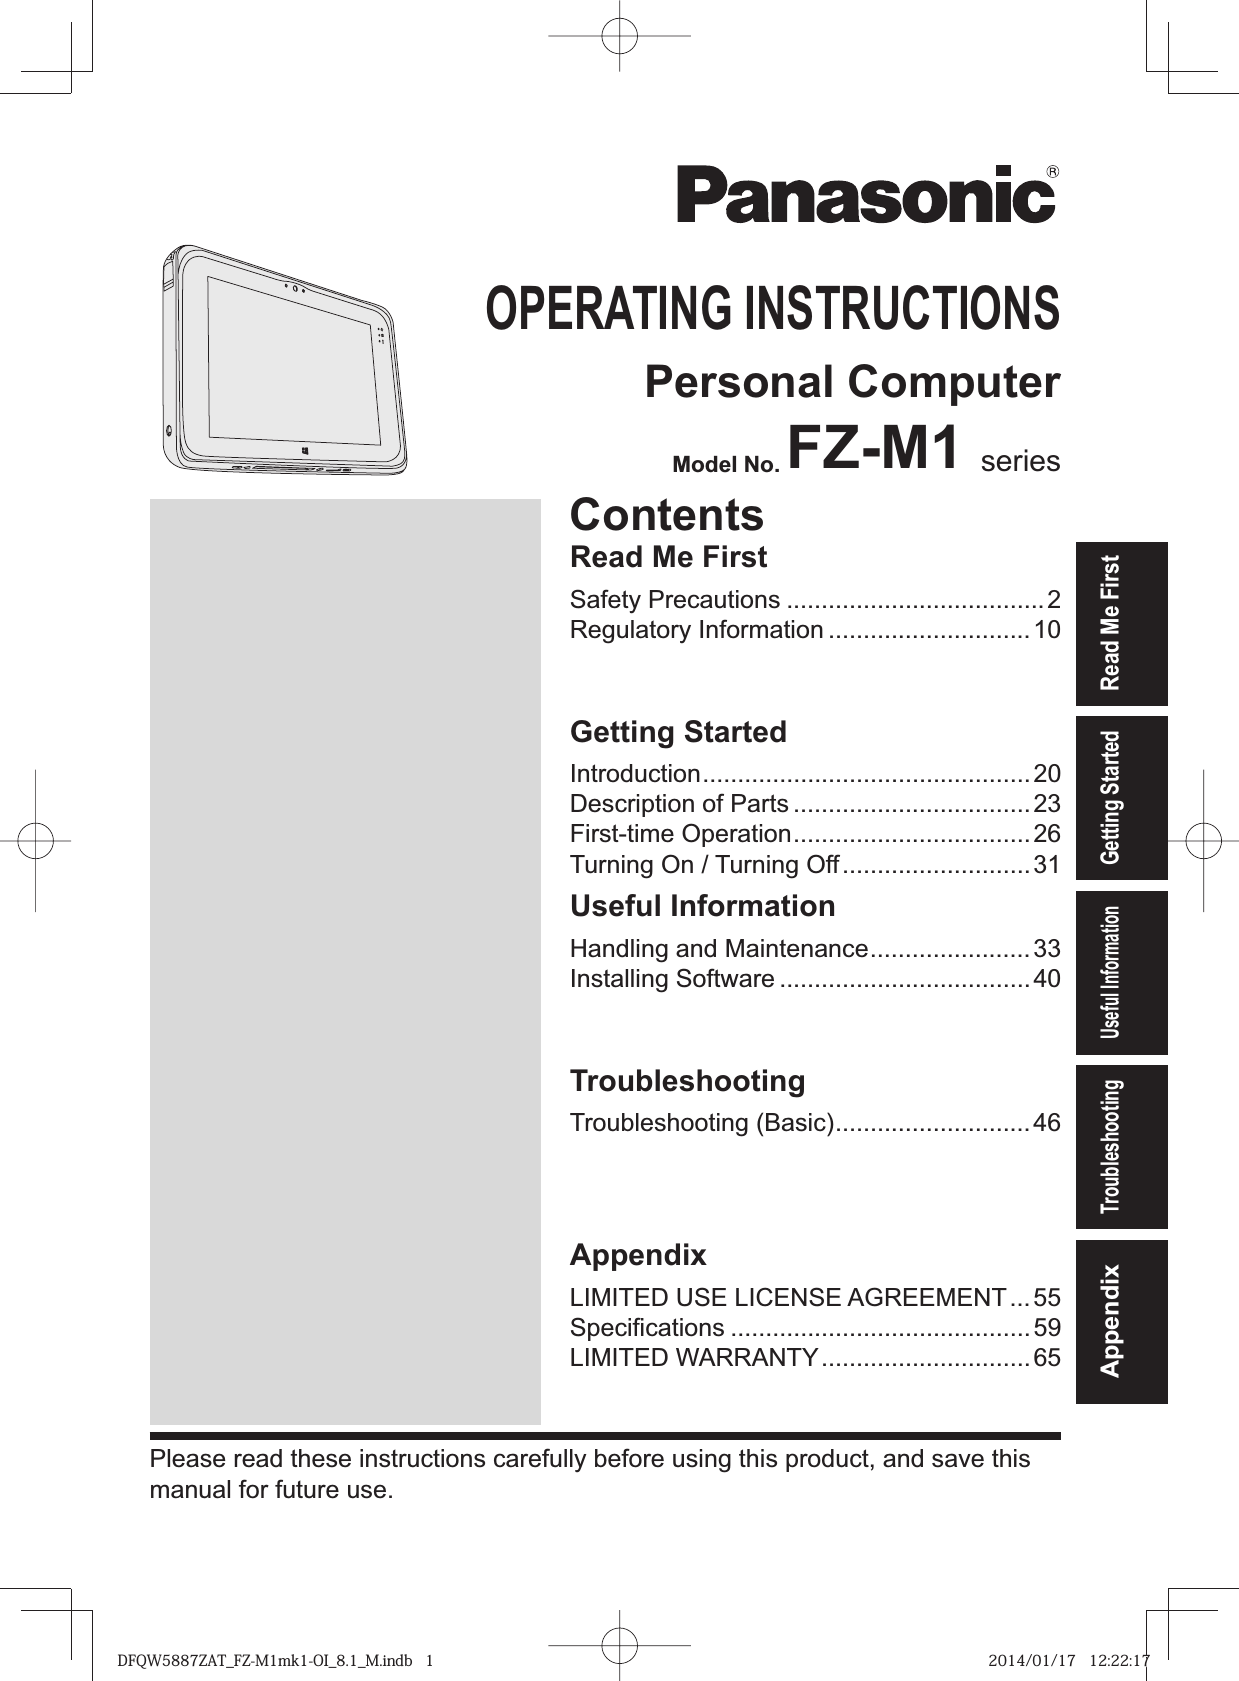 Read Me FirstGetting StartedUseful InformationTroubleshootingAppendixOPERATING INSTRUCTIONSPersonal ComputerModel No. FZ-M1 seriesPlease read these instructions carefully before using this product, and save this manual for future use.ContentsRead Me FirstSafety Precautions .....................................2Regulatory Information .............................10Getting StartedIntroduction ...............................................20Description of Parts ..................................23First-time Operation ..................................26Turning On / Turning Off ...........................31Useful InformationHandling and Maintenance .......................33Installing Software ....................................40TroubleshootingTroubleshooting (Basic) ............................46AppendixLIMITED USE LICENSE AGREEMENT ...55SpeciÞ cations ...........................................59LIMITED WARRANTY ..............................65DFQW5887ZAT_FZ-M1mk1-OI_8.1_M.indb   1 2014/01/17   12:22:17